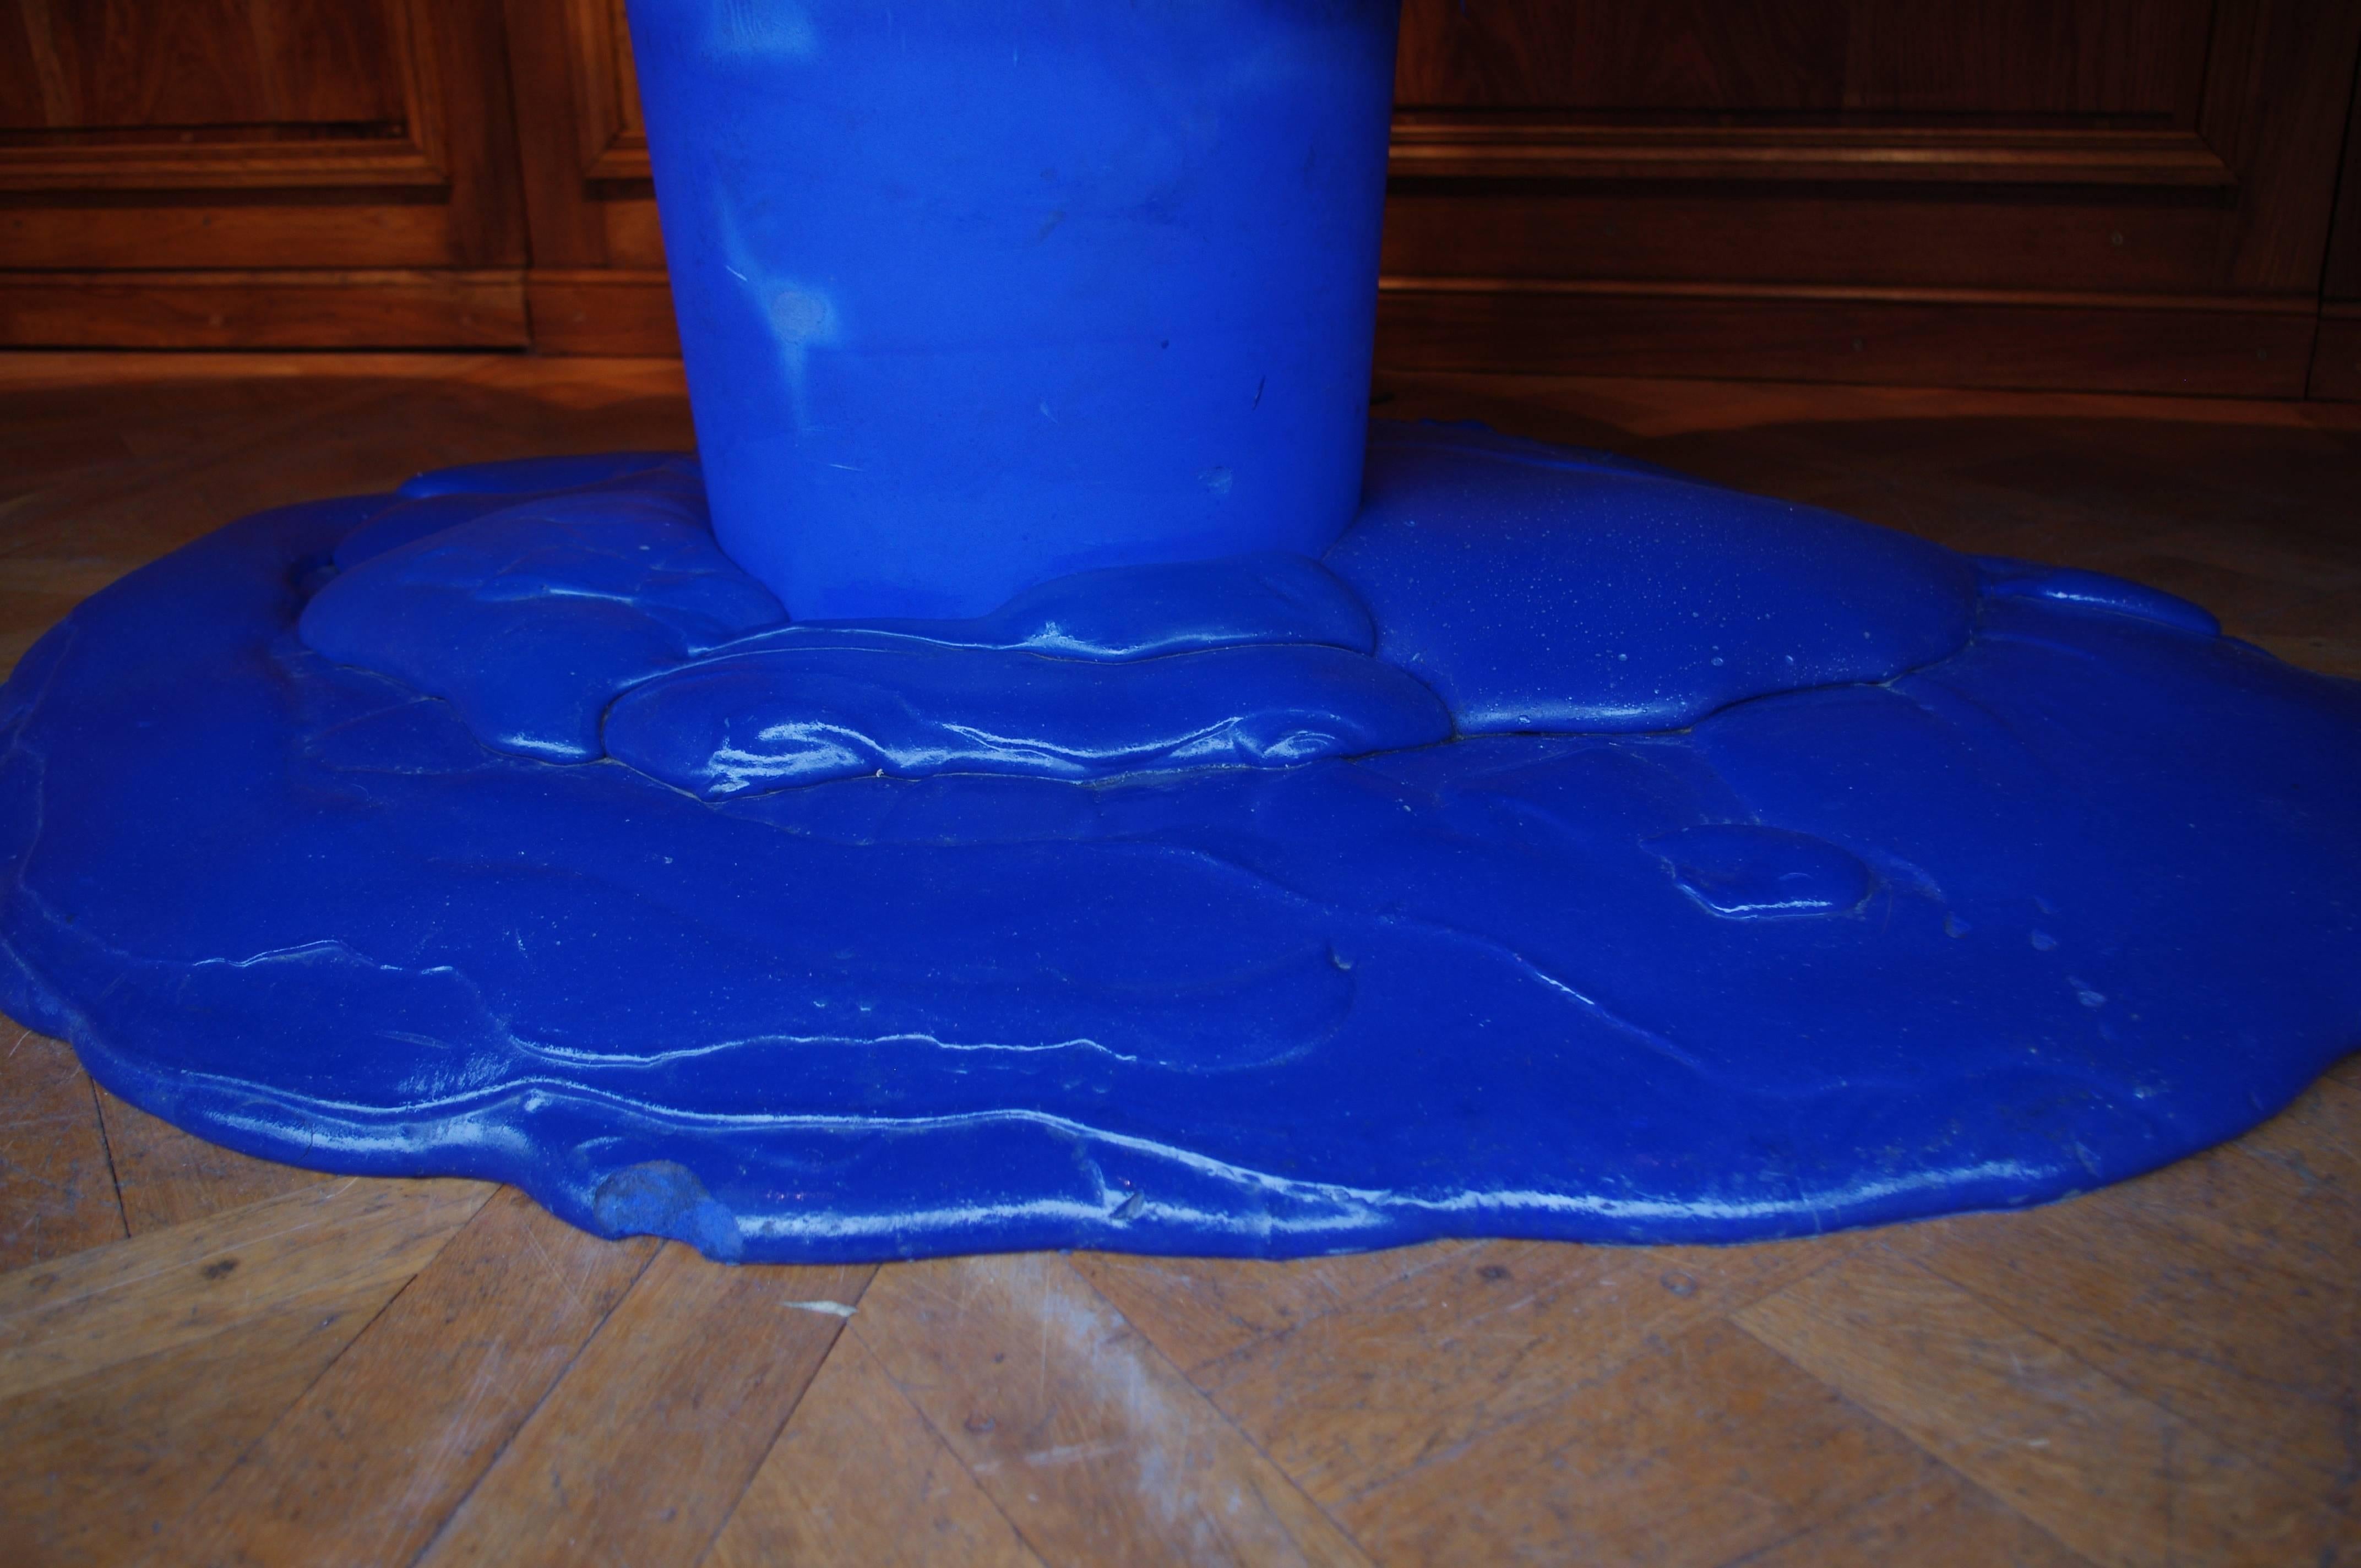 Blue polyurethane. Contemporary art. The artist, Louis Durot makes polyurethane his trademark: It's a high technology material which mix nitrogen, oxygen and carbon, which allow unusual shapes, aspects, properties and textures. Thanks to its